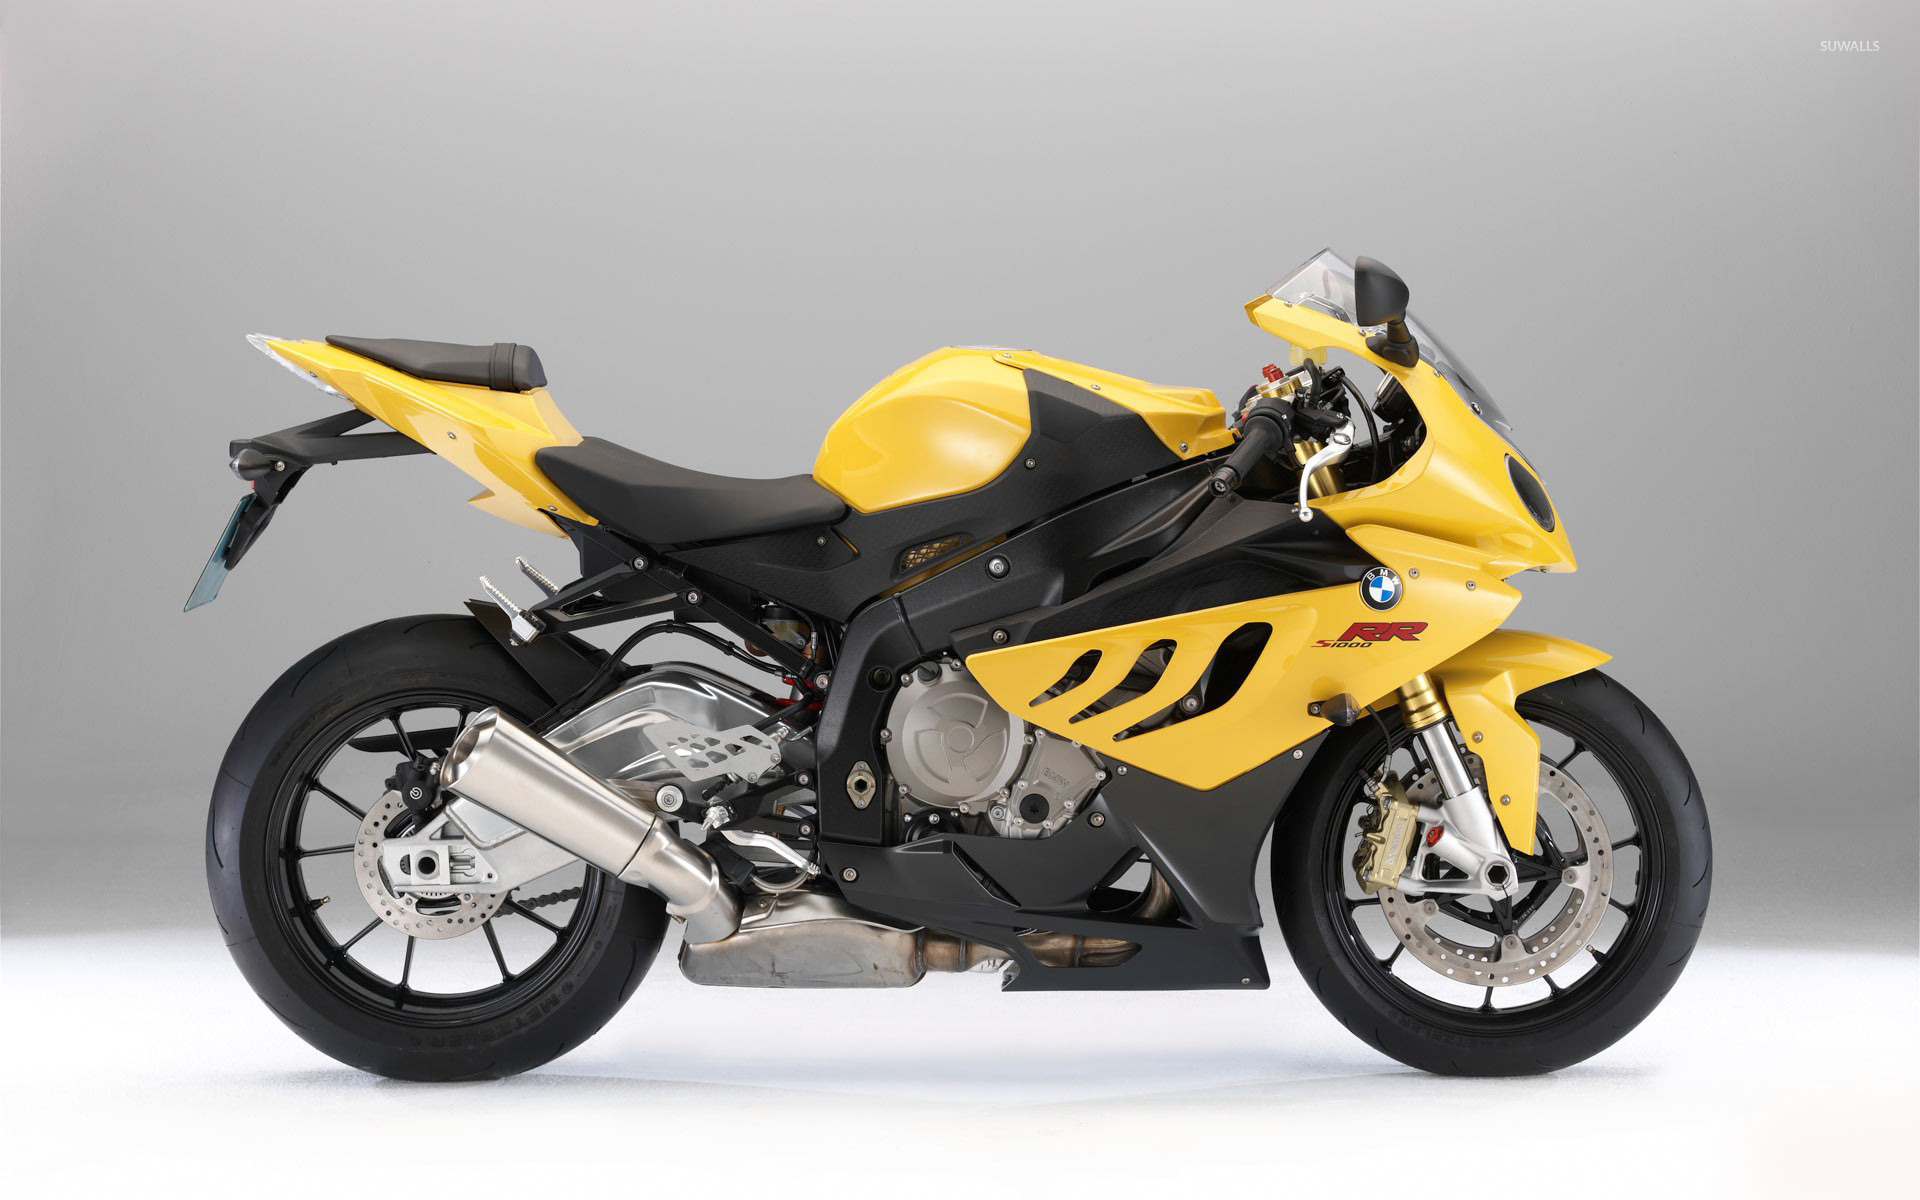 BMW S1000RR [17] wallpaper  Motorcycle wallpapers  11138